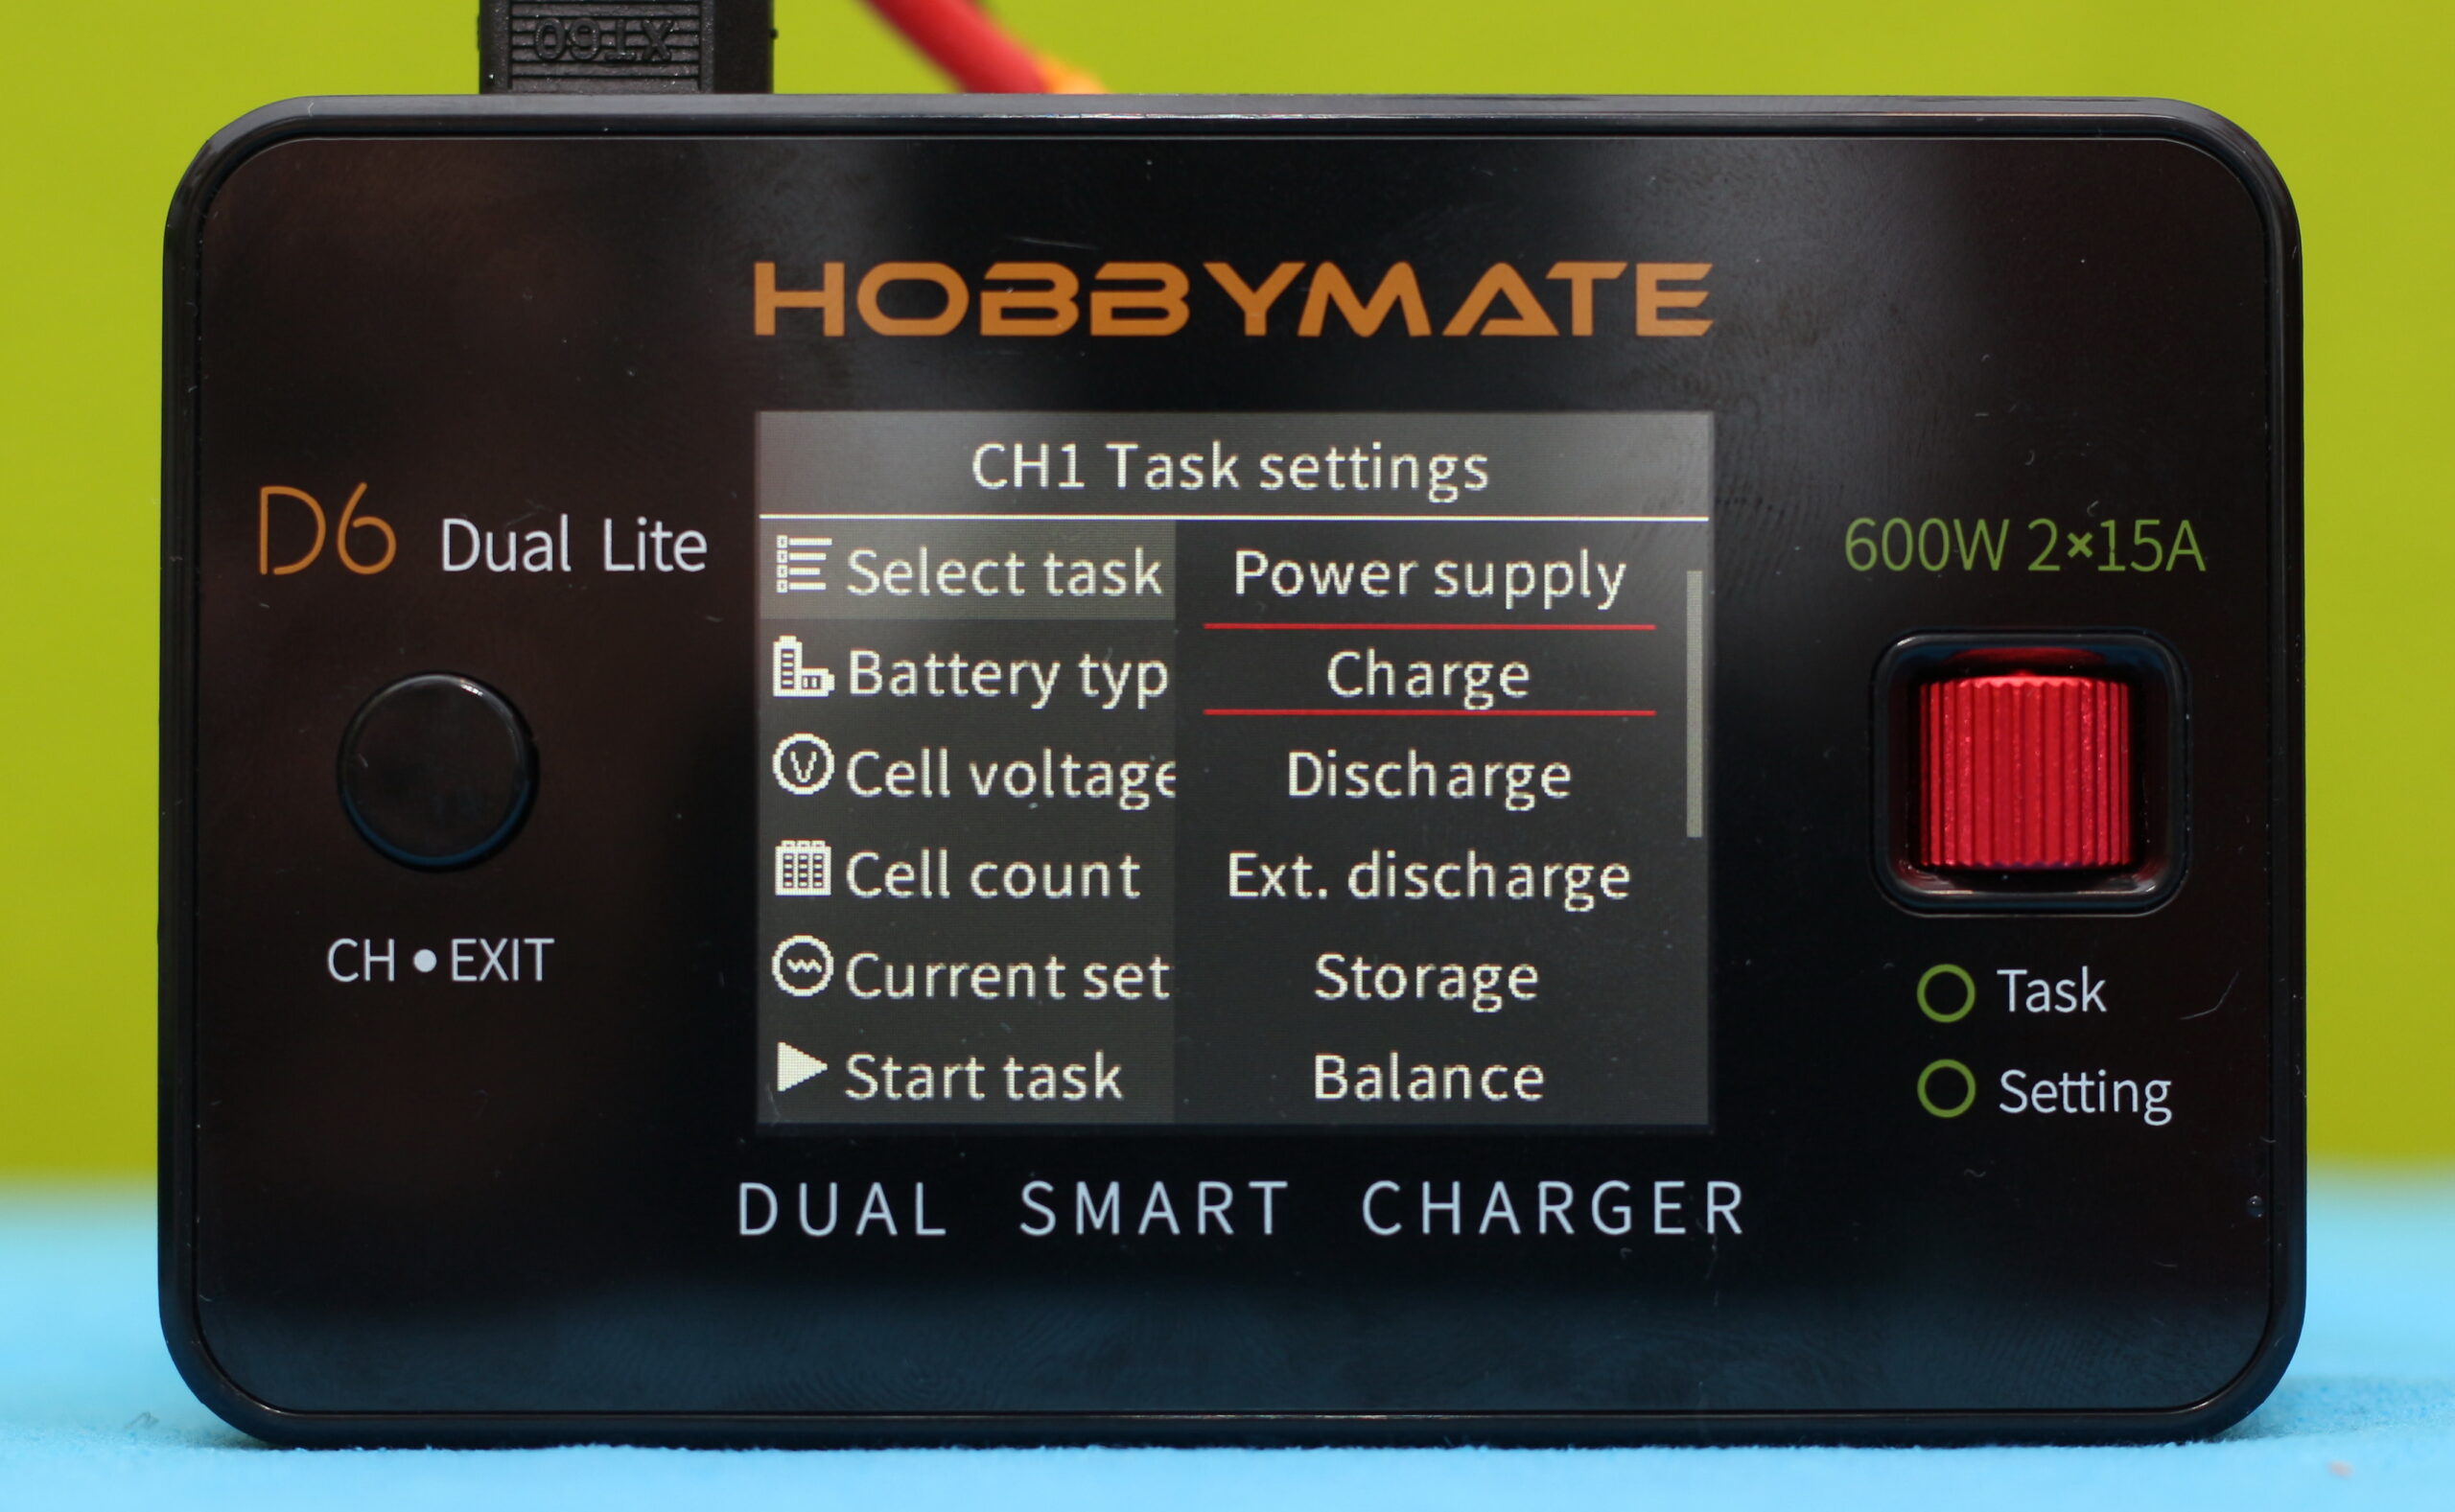 Program modes of D6 Dual Lite charger